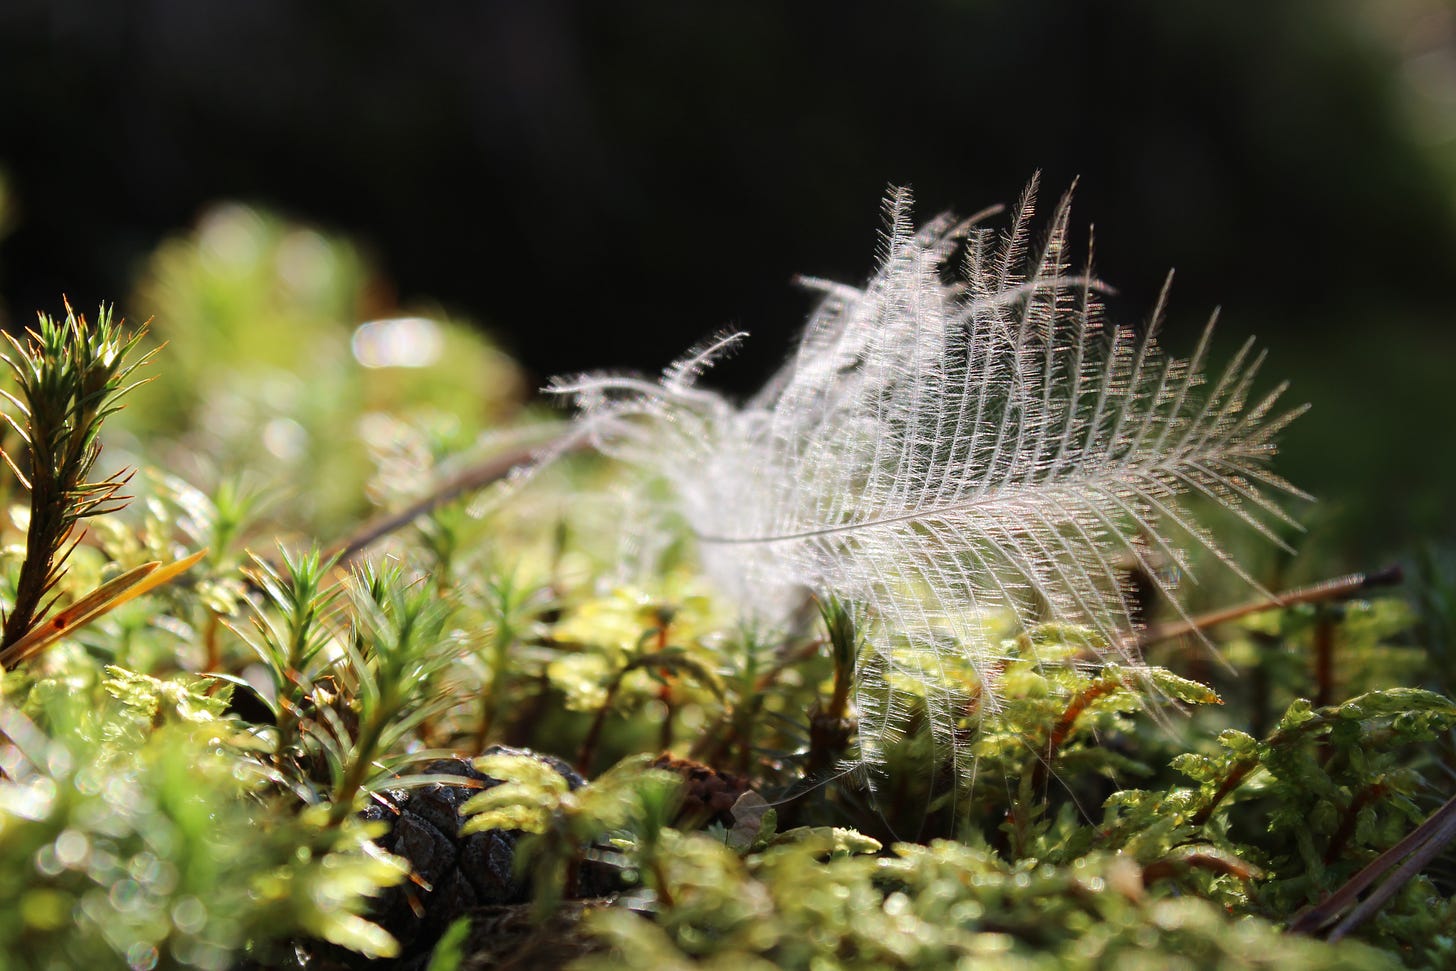 Intricately fine white feather resting lightly atop fine mini fern fronds. Gentle feeling ambient blurring light in the background. Photo by <a href="https://unsplash.com/@polarmermaid?utm_source=unsplash&utm_medium=referral&utm_content=creditCopyText">Anne Nygård</a> on <a href="https://unsplash.com/s/photos/ethereal?utm_source=unsplash&utm_medium=referral&utm_content=creditCopyText">Unsplash</a>   Part of a post by Melanie Williams de Amaya on Driftwood & Grace.